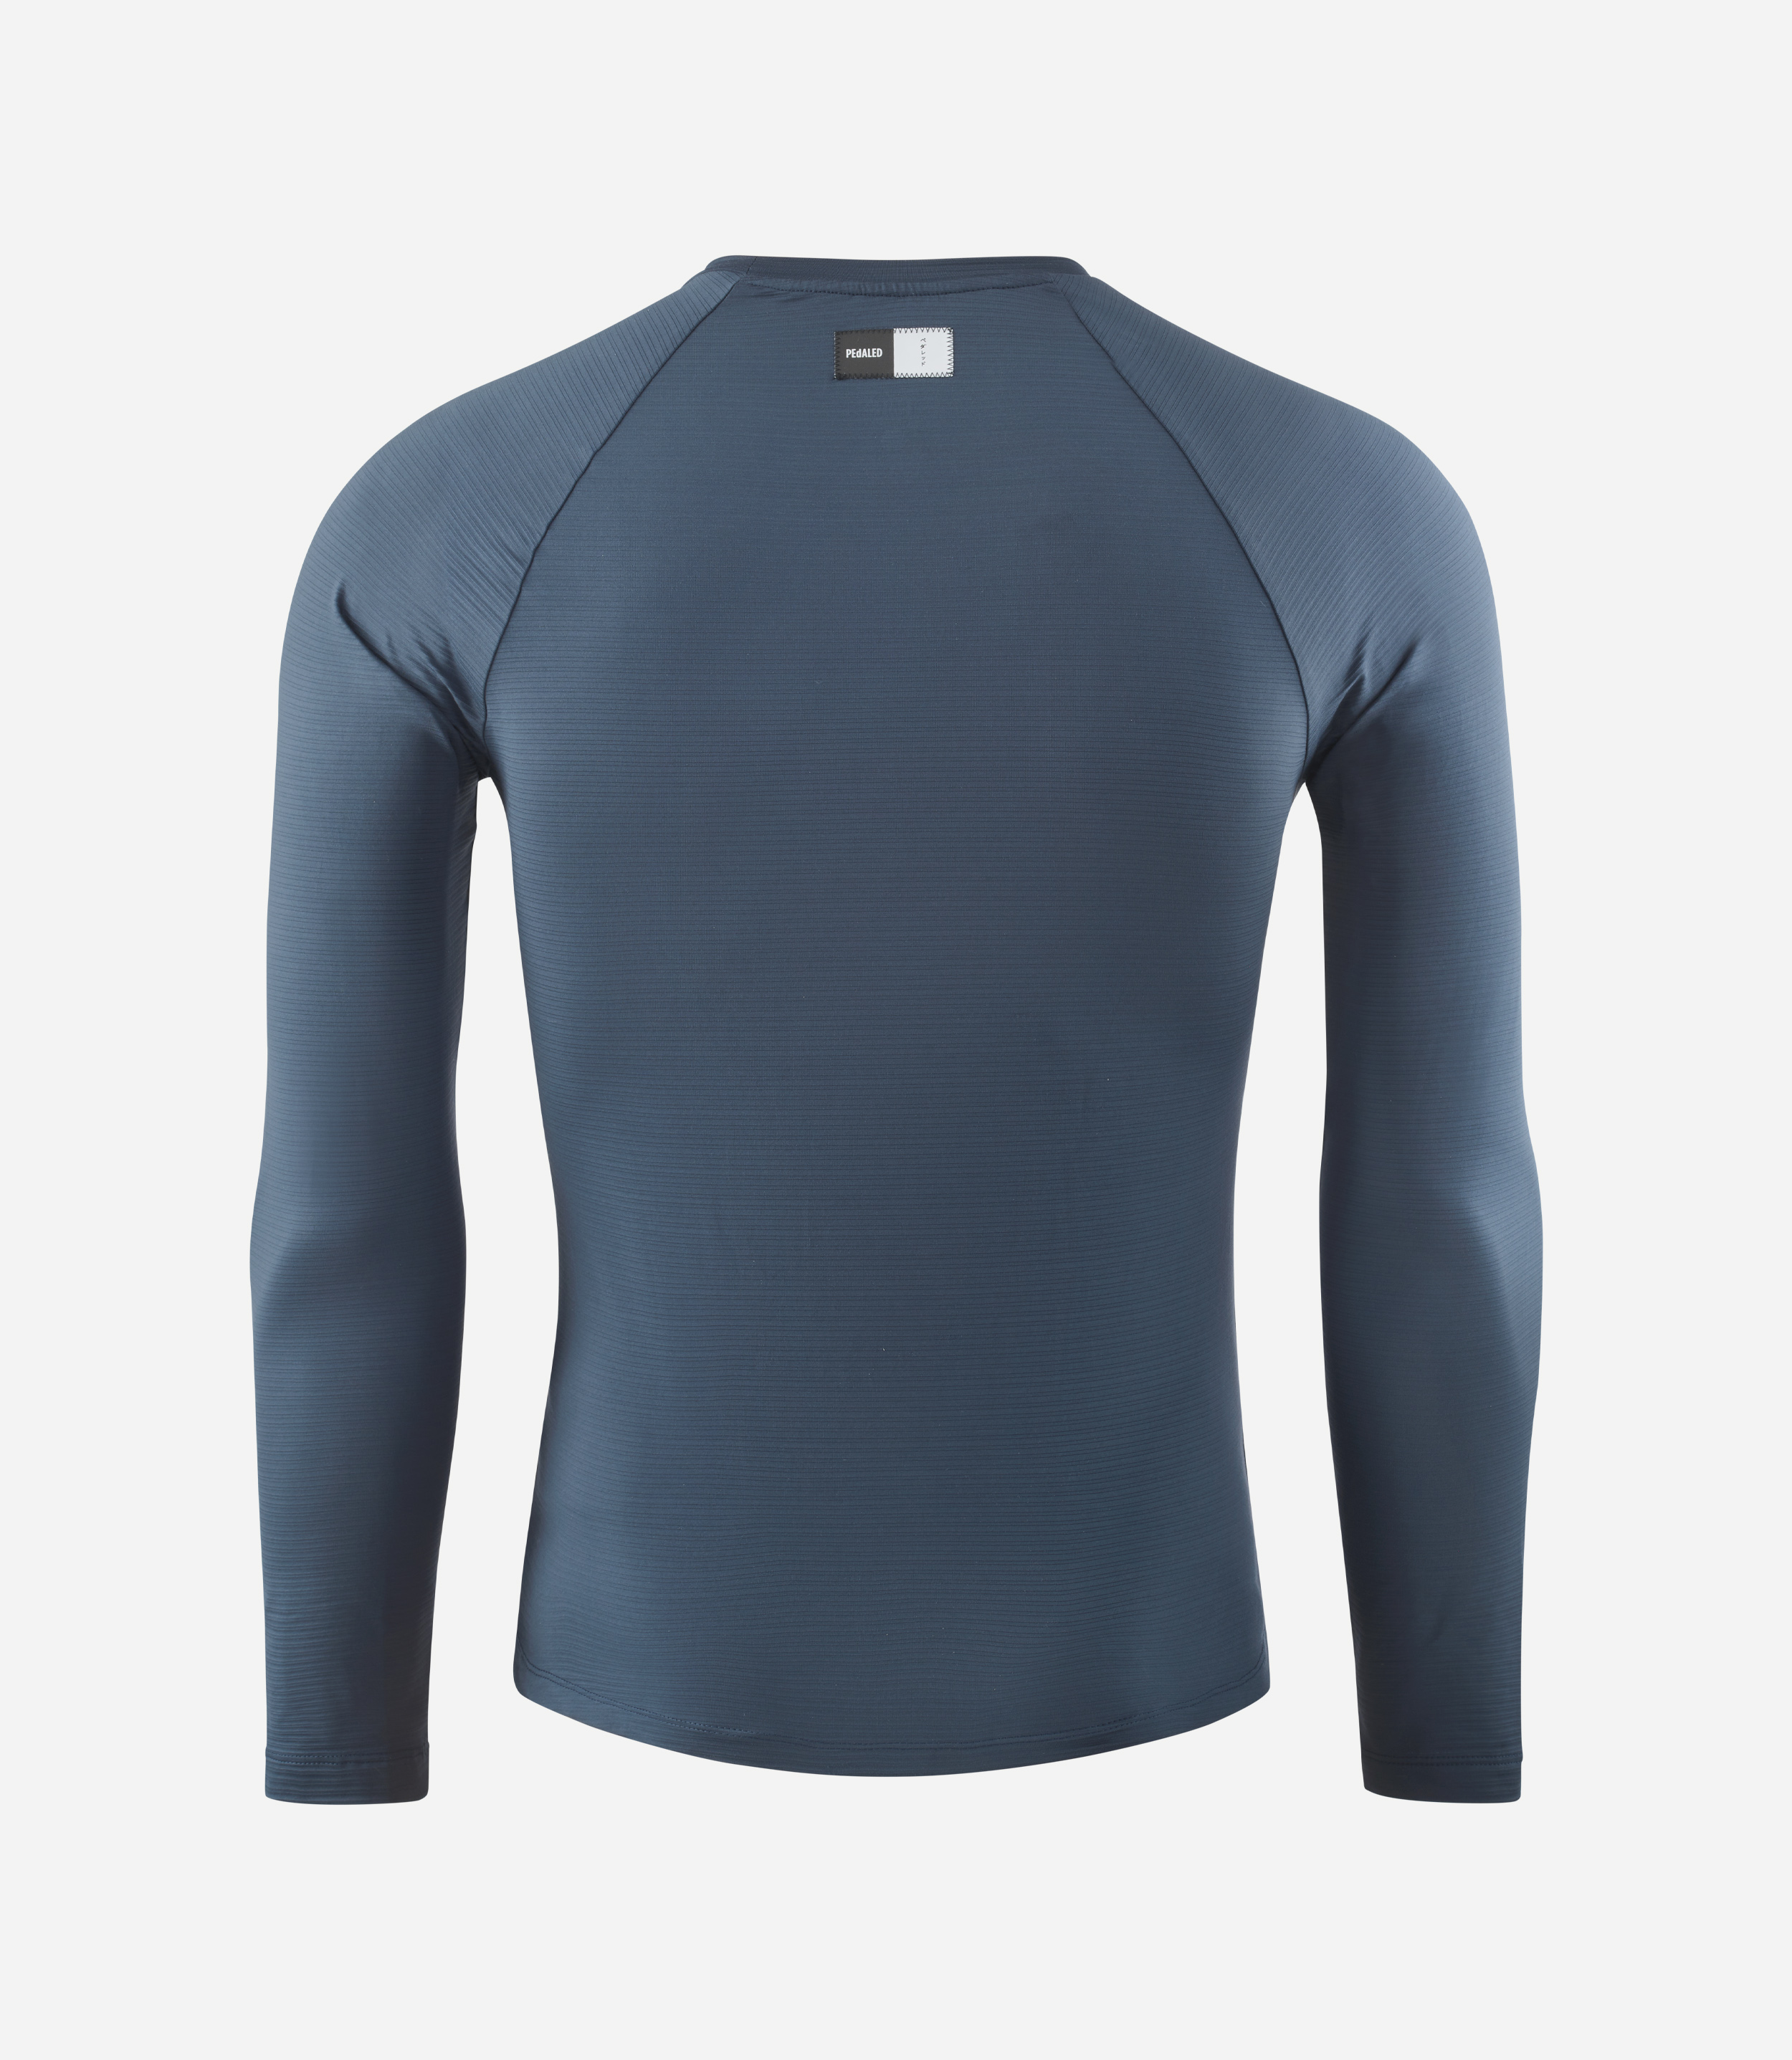 https://production-media-cdn.pedaled.com/media/catalog/product/m/e/men-cycling-thermo-longsleeve-baselayer-navy-element-back-pedaled.jpg